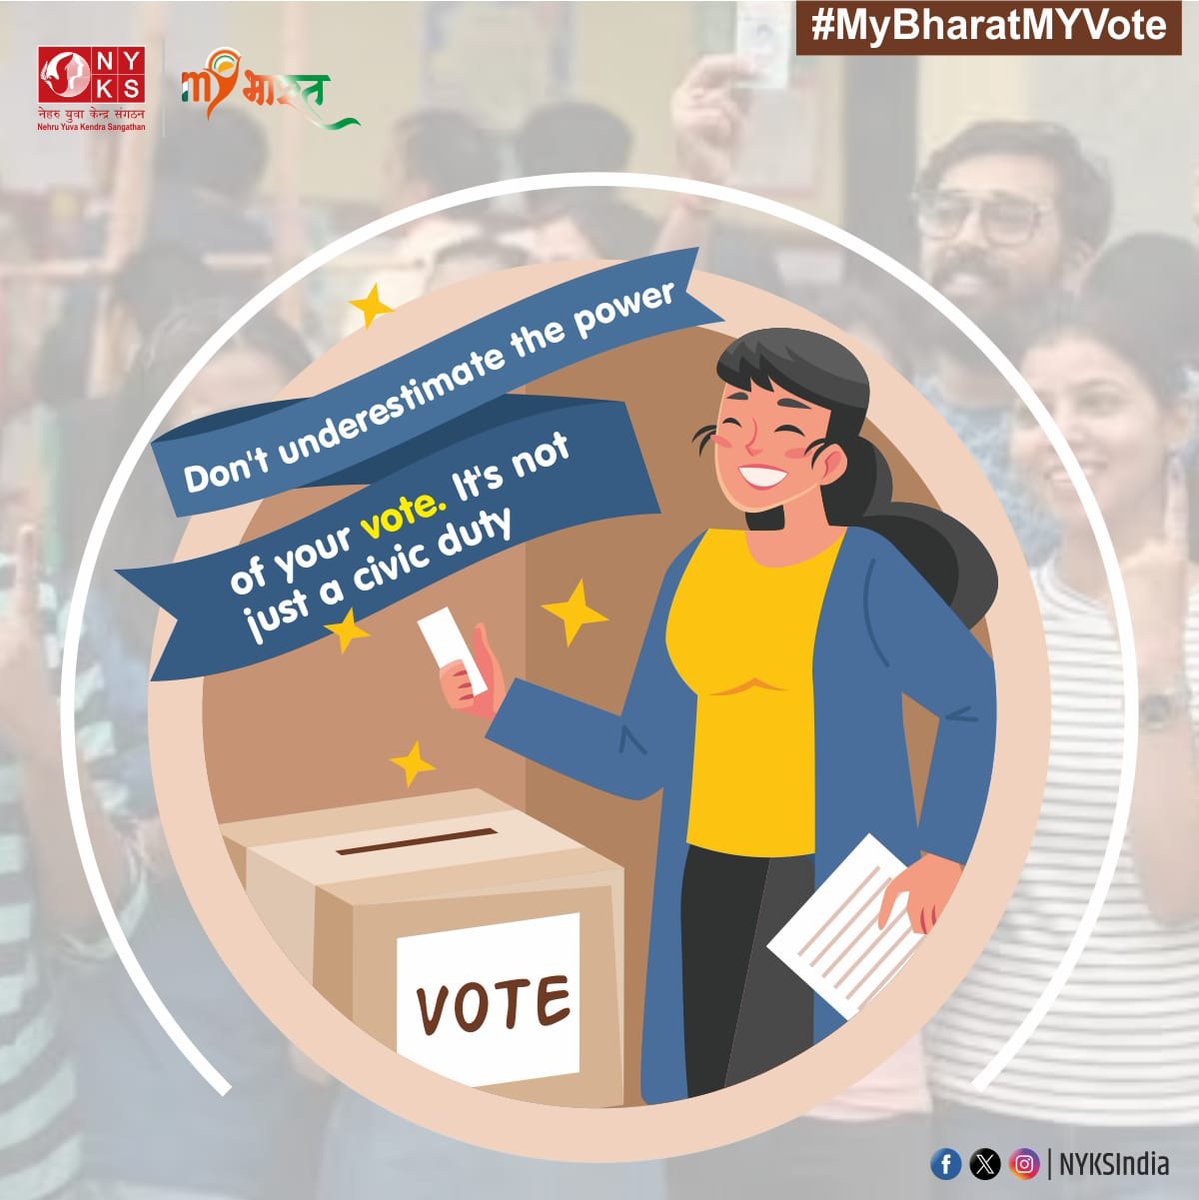 Your vote is your voice – never underestimate its power. It's not just a civic duty; it's the foundation of democracy. Let's make our voices heard and shape the future we believe in.
#MYBharatMYVote #Vote4Sure #PowerOfTheVote #Democracy